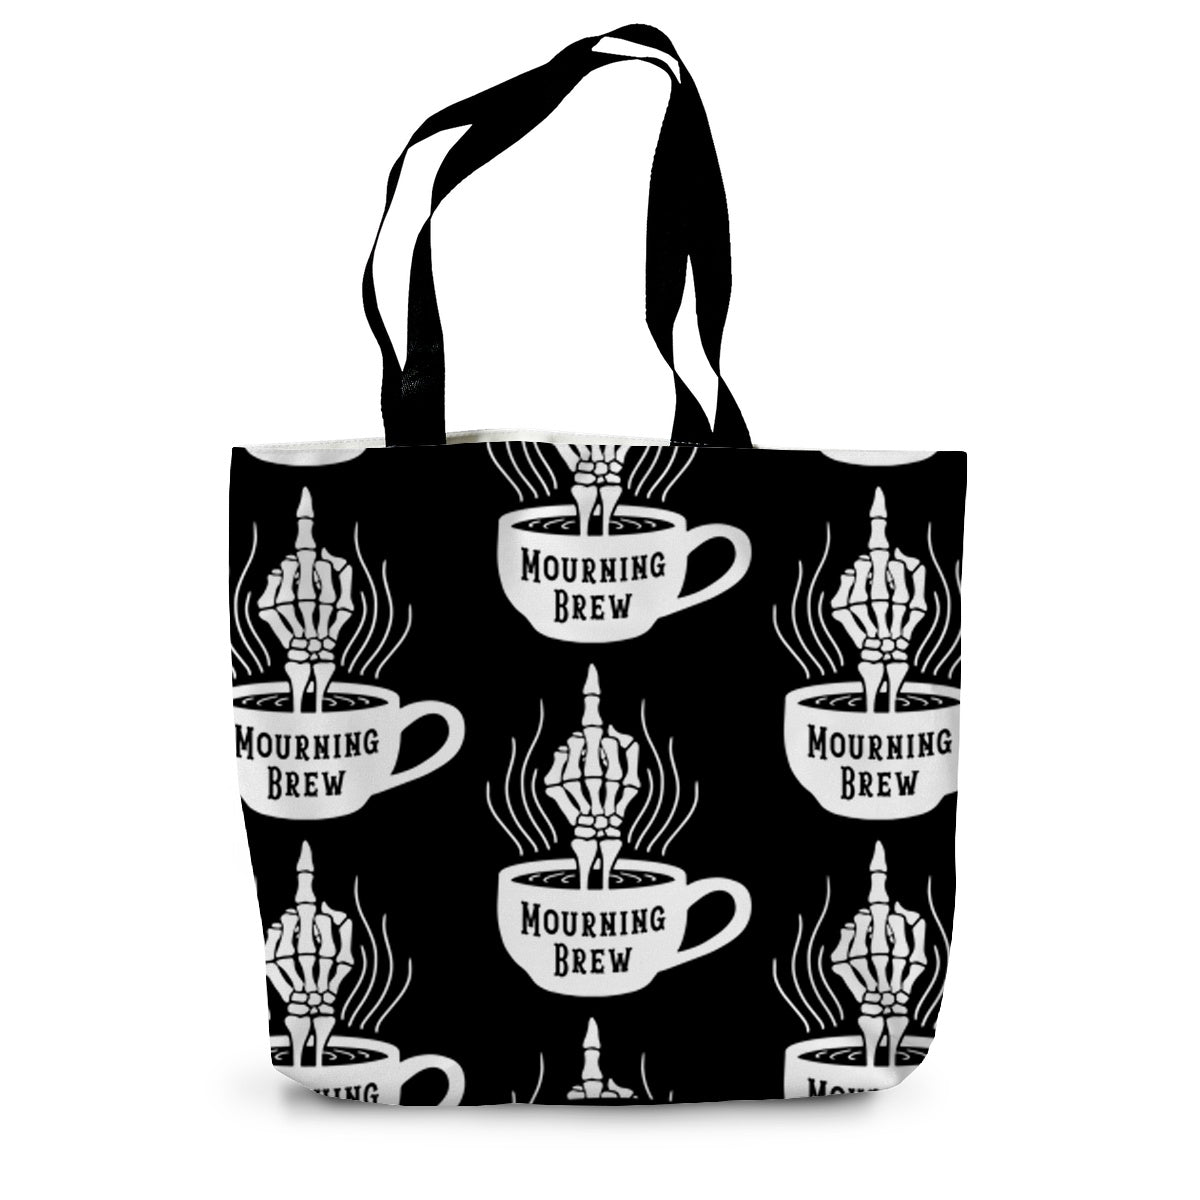 Mourning brew canvas tote bag